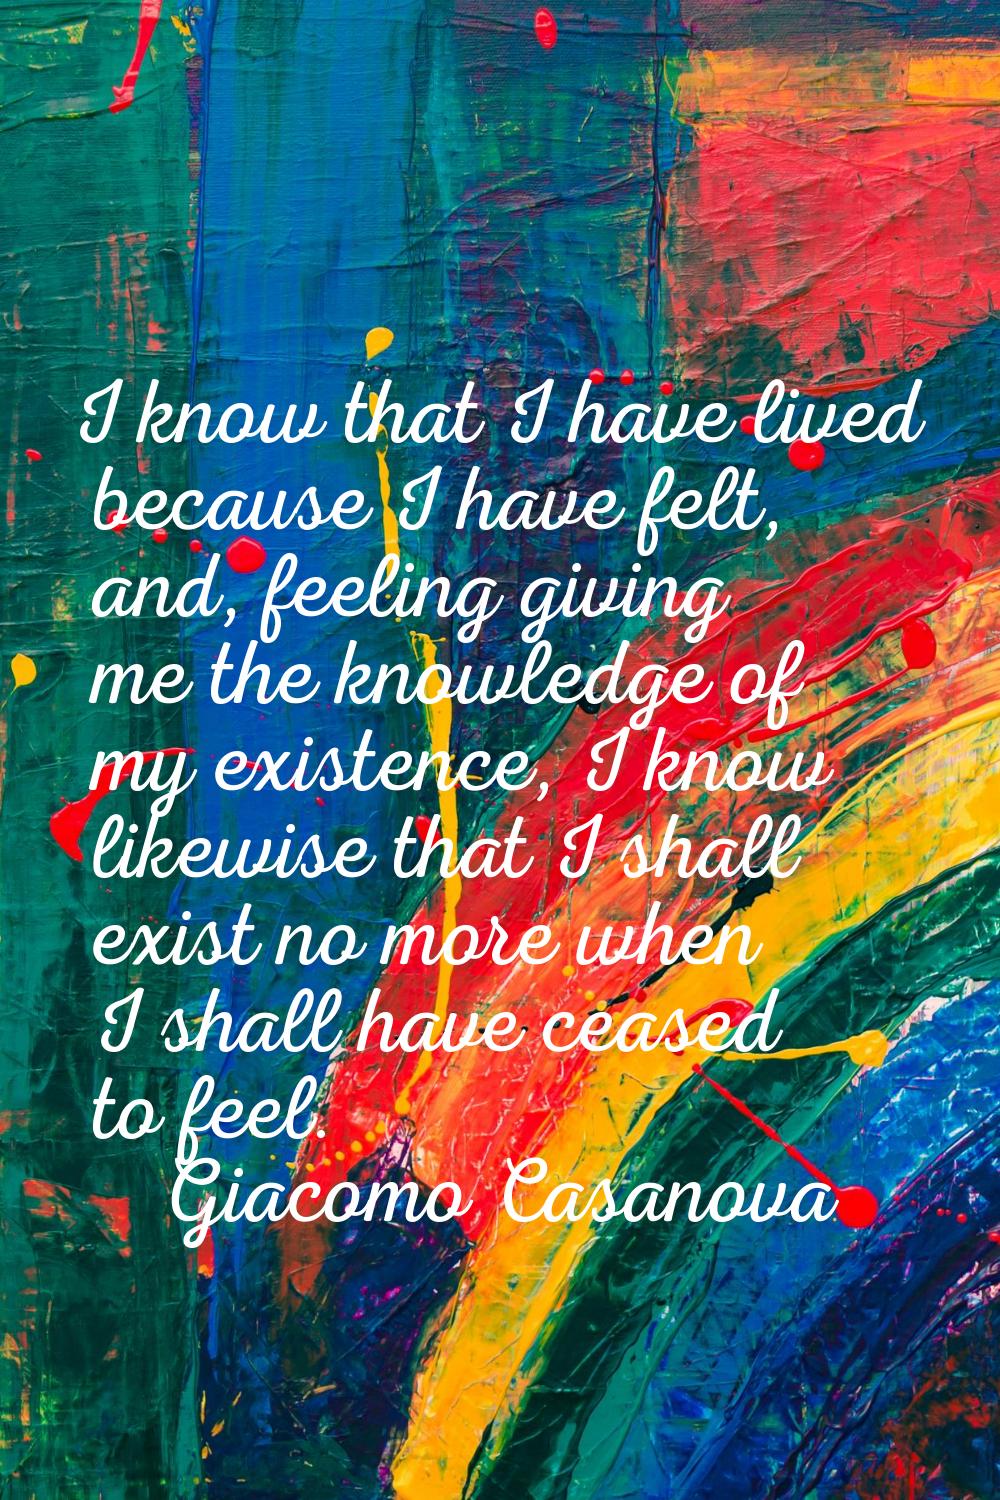 I know that I have lived because I have felt, and, feeling giving me the knowledge of my existence,